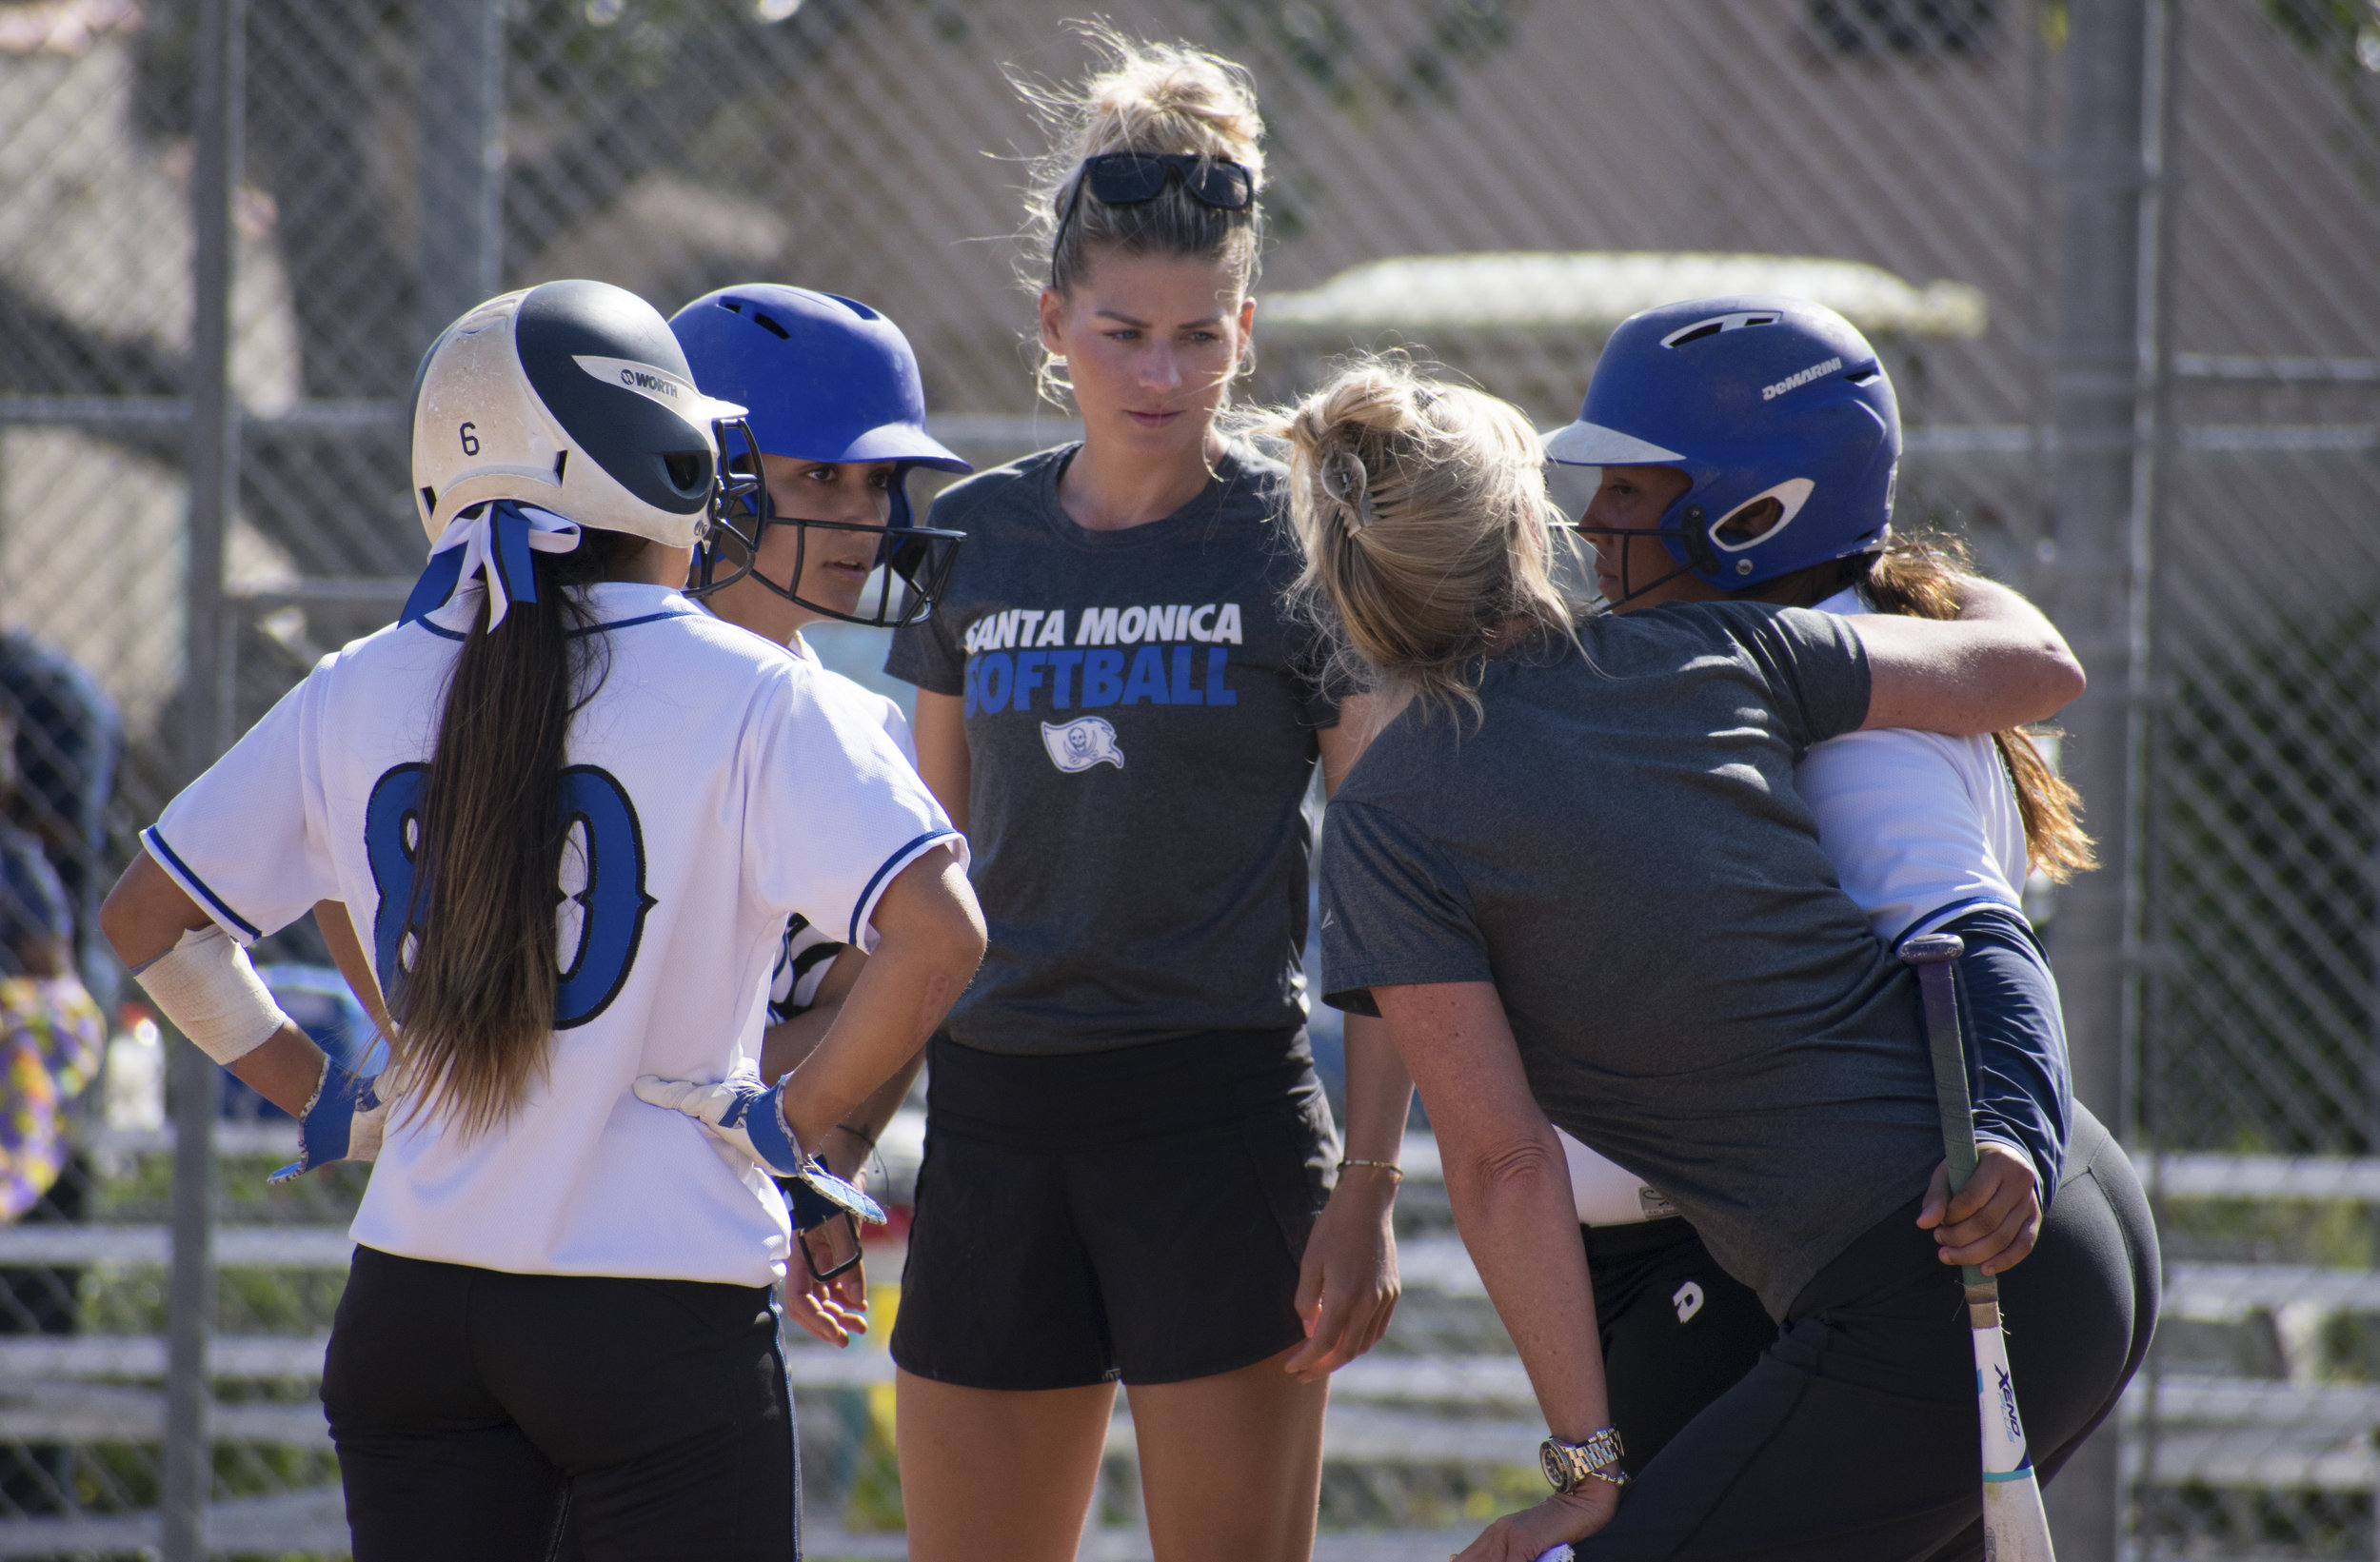  Assistant coach Sam Sheeley gives direction to the Santa Monica Corsairs during a softball game against the Cuesta College Cougars on Tuesday, April 4 at the John Adams Middle School Field in Santa Monica, California. It was a close 10-inning game, 